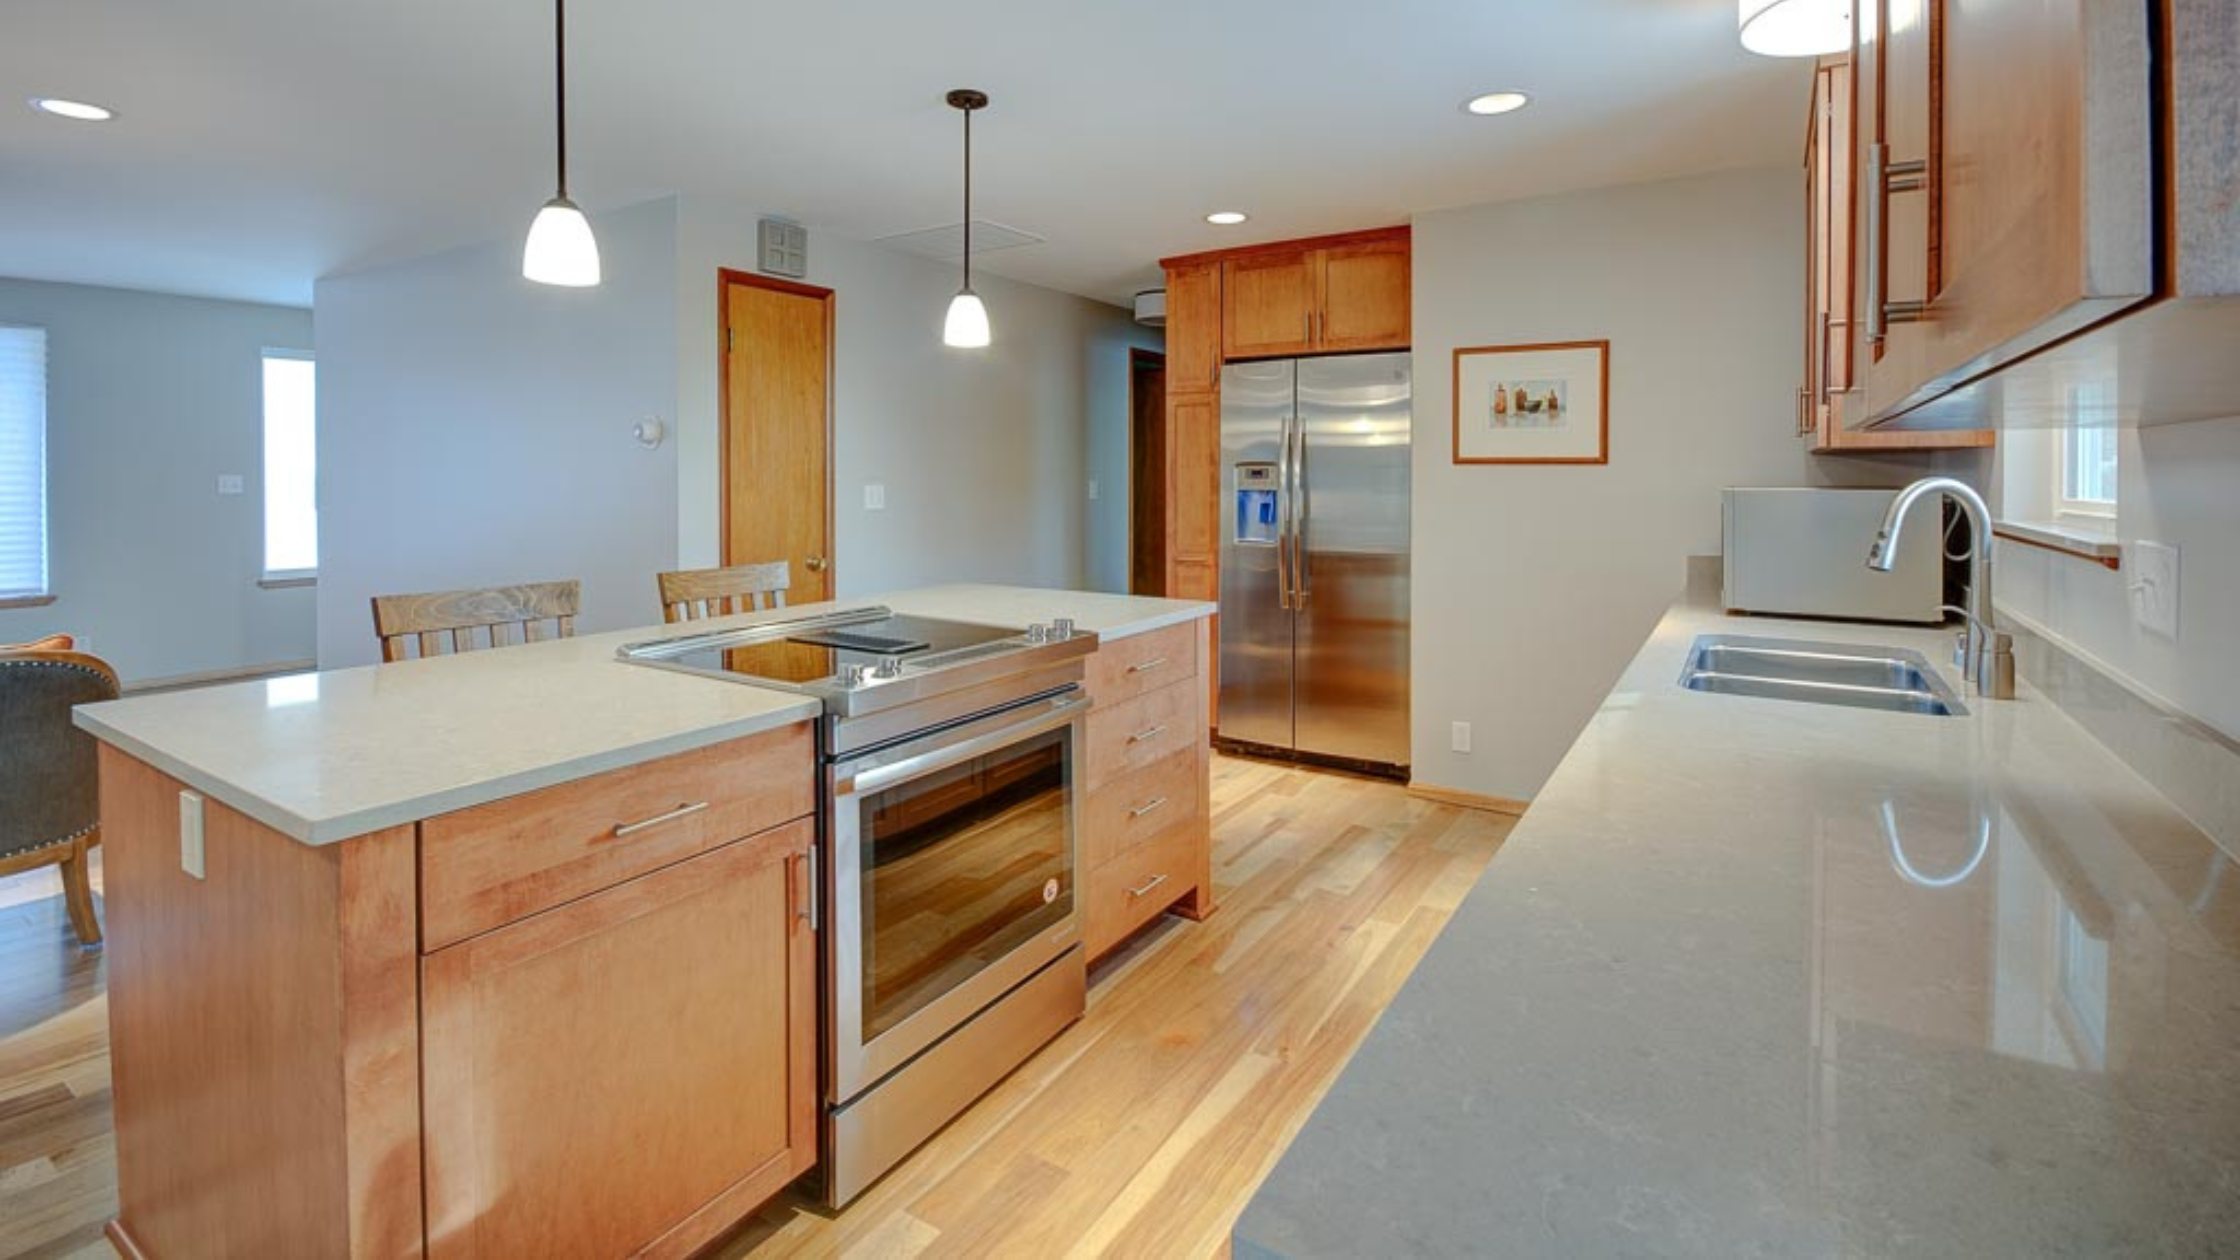 How Much Space is Needed for a Kitchen Island?